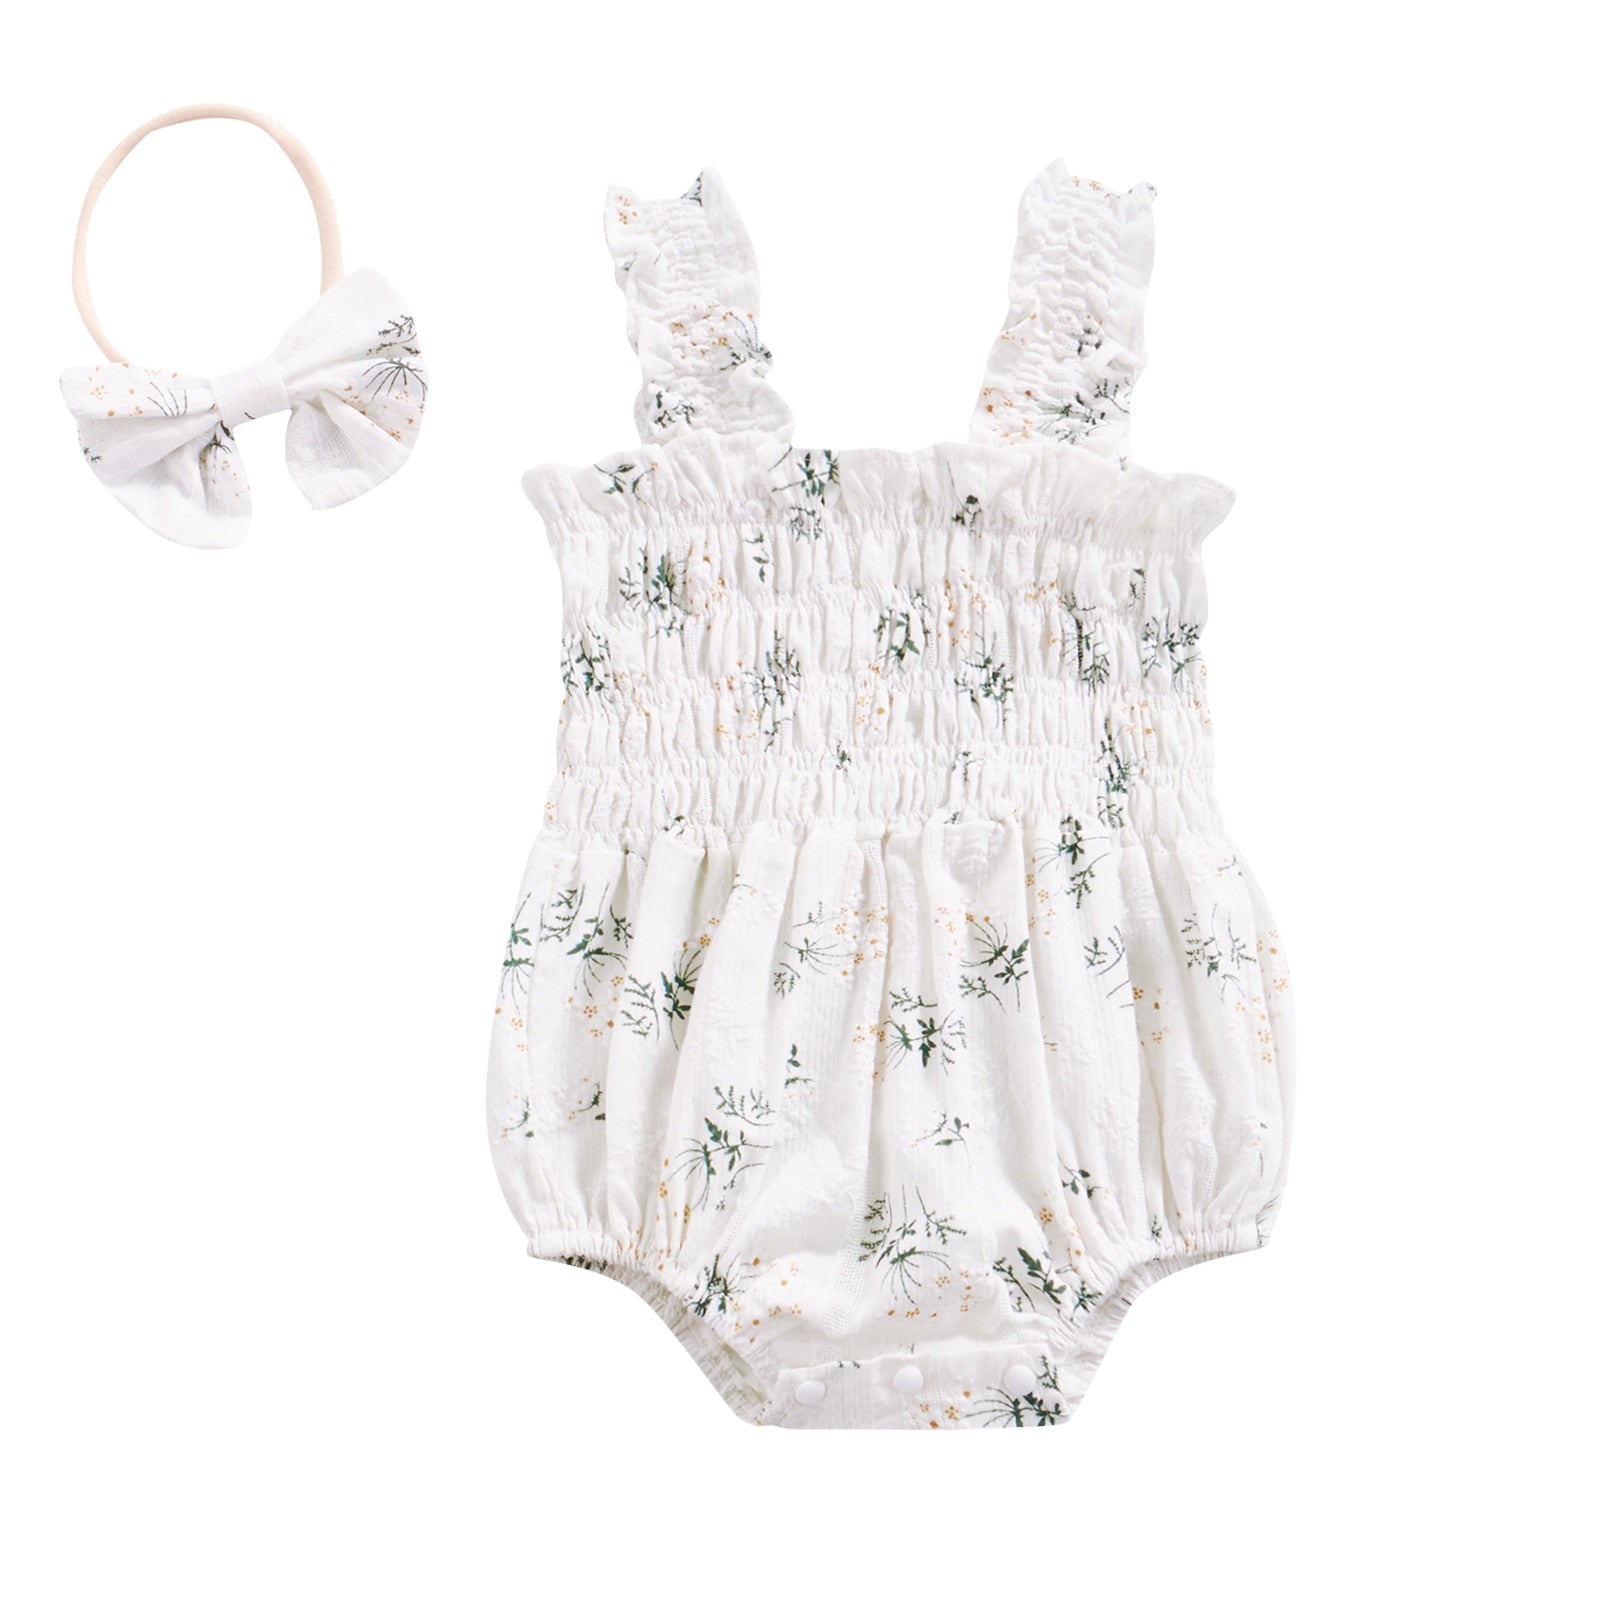 The Melodie Romper & Bow